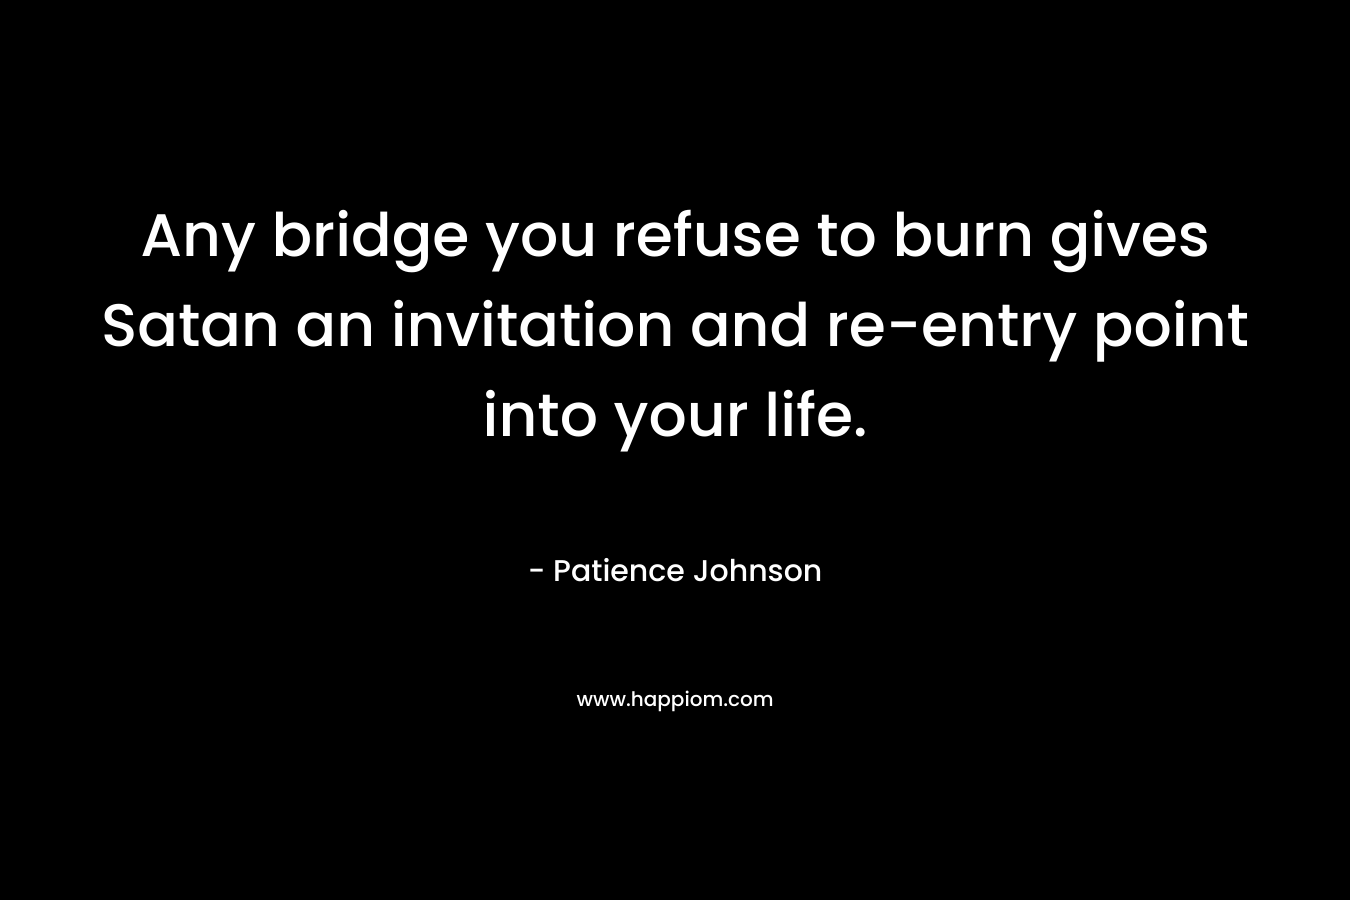 Any bridge you refuse to burn gives Satan an invitation and re-entry point into your life.